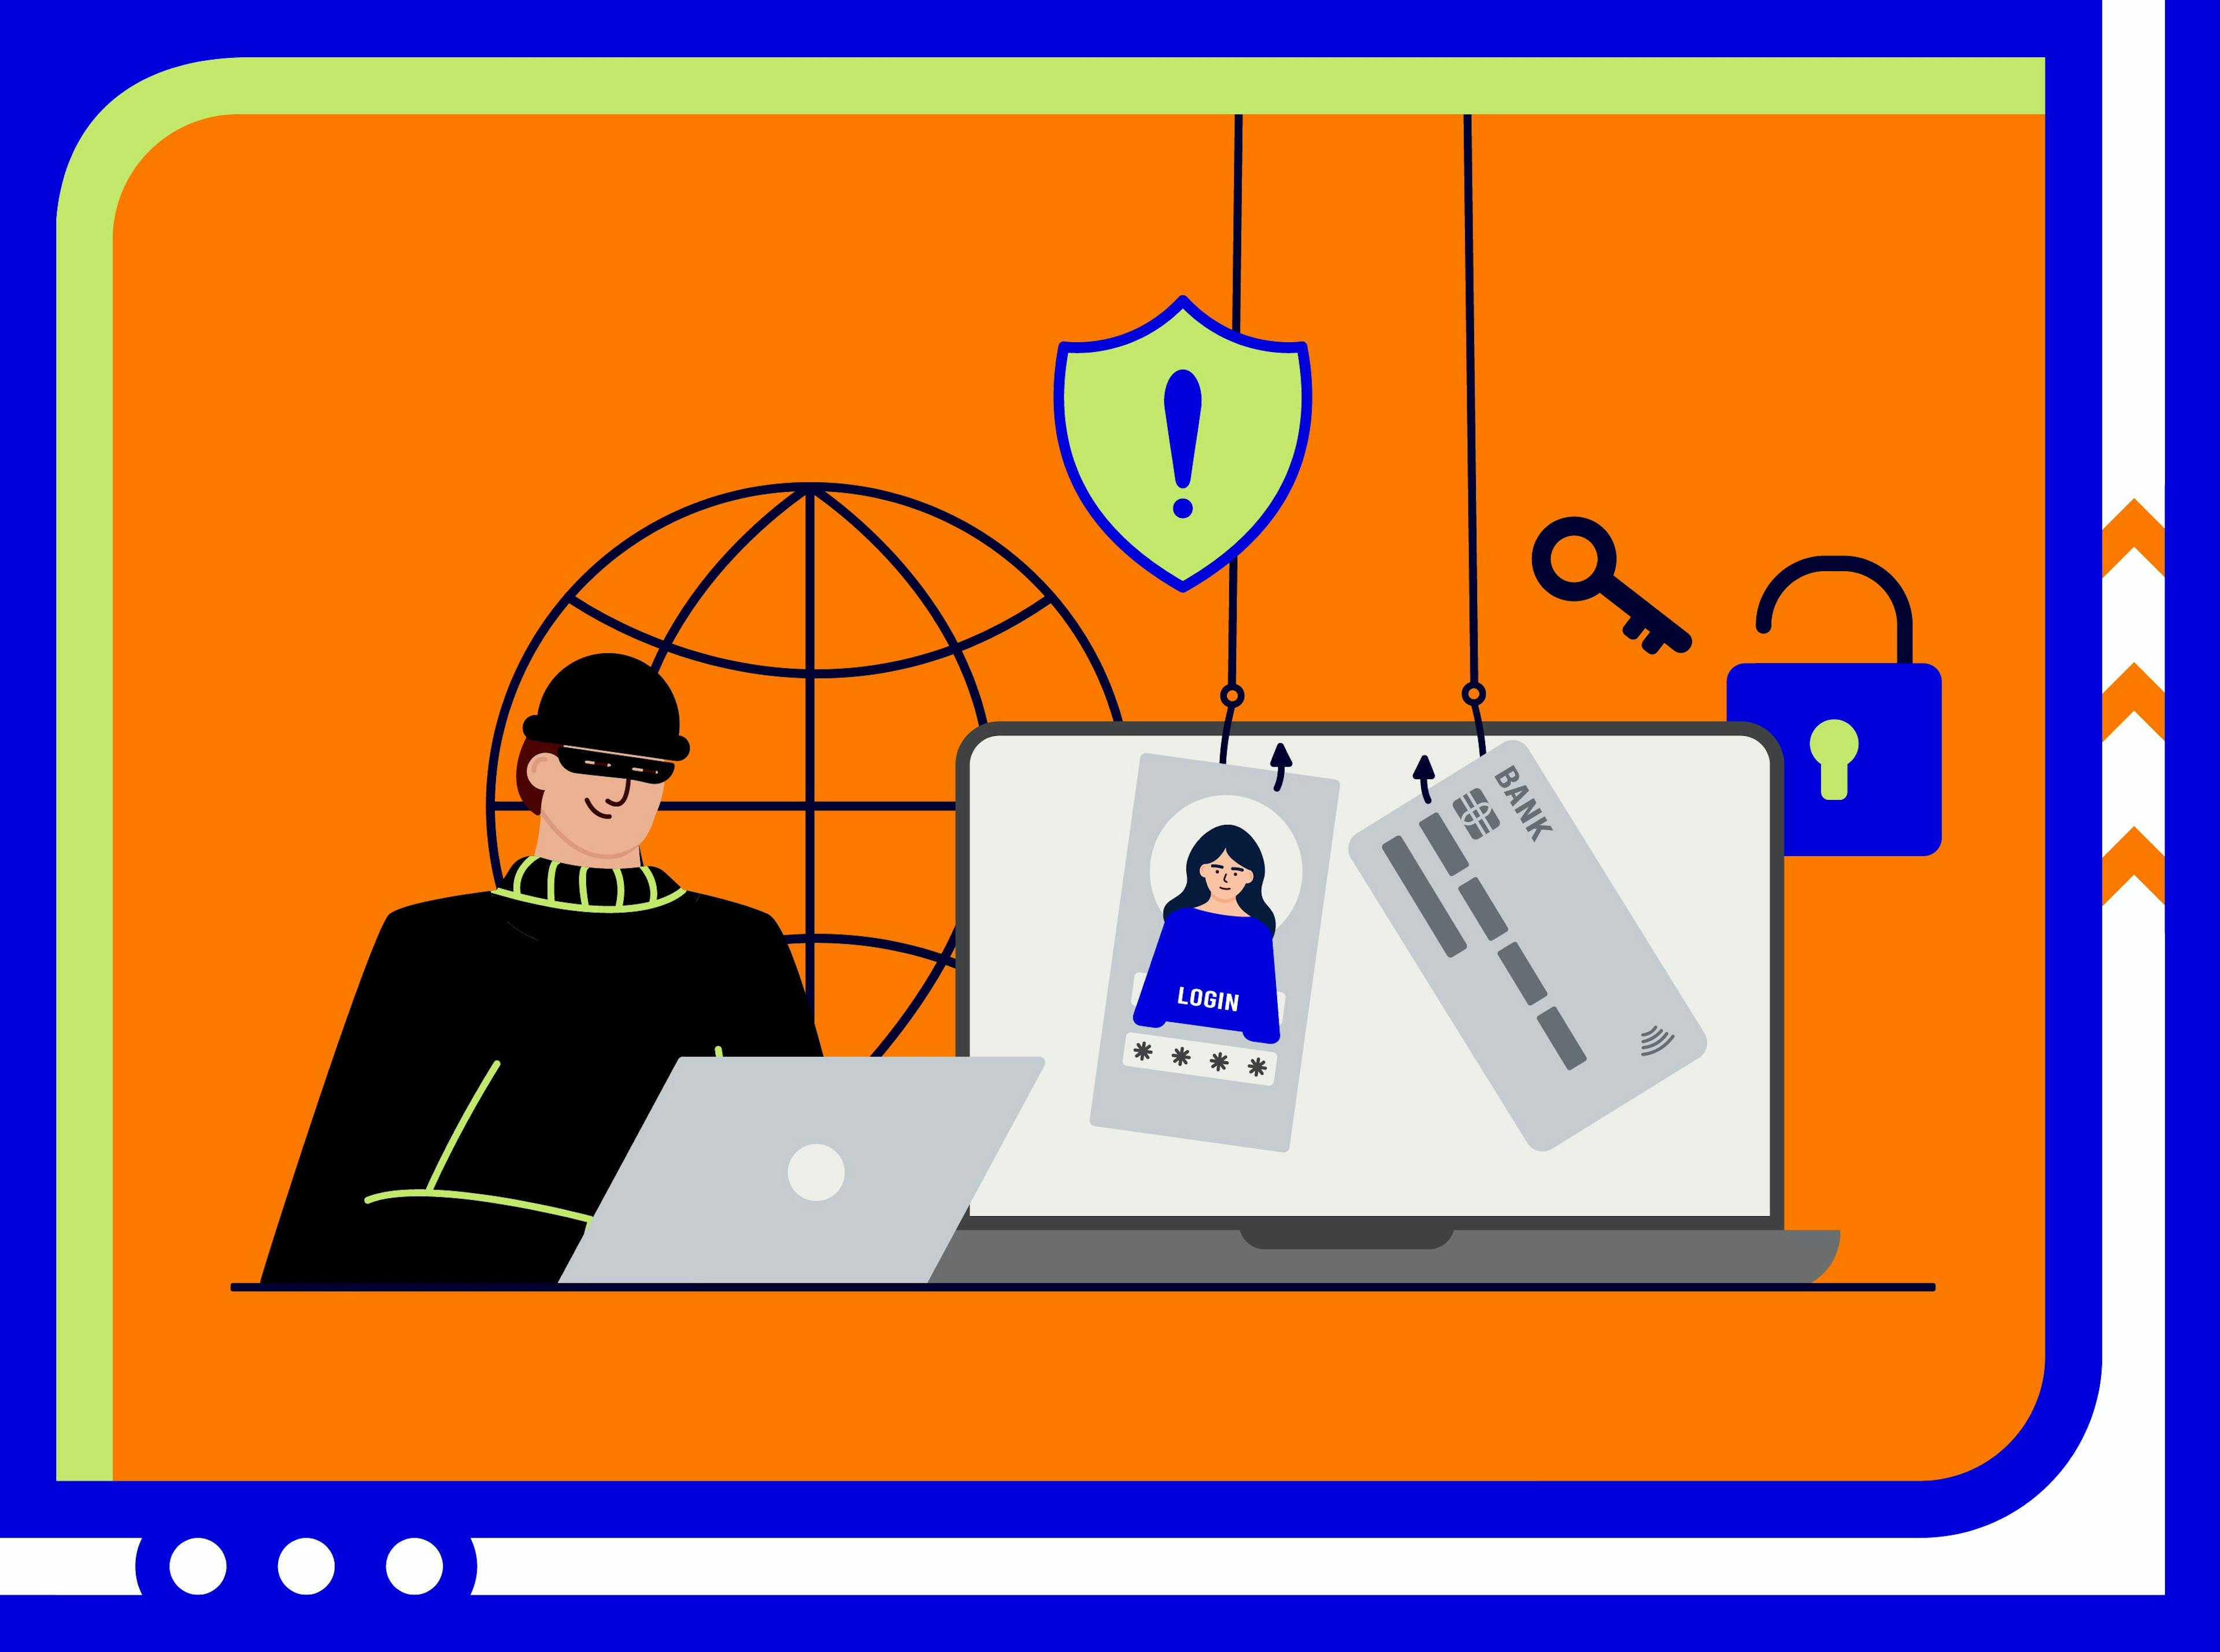 Ecommerce fraud prevention: effective strategies to protect business